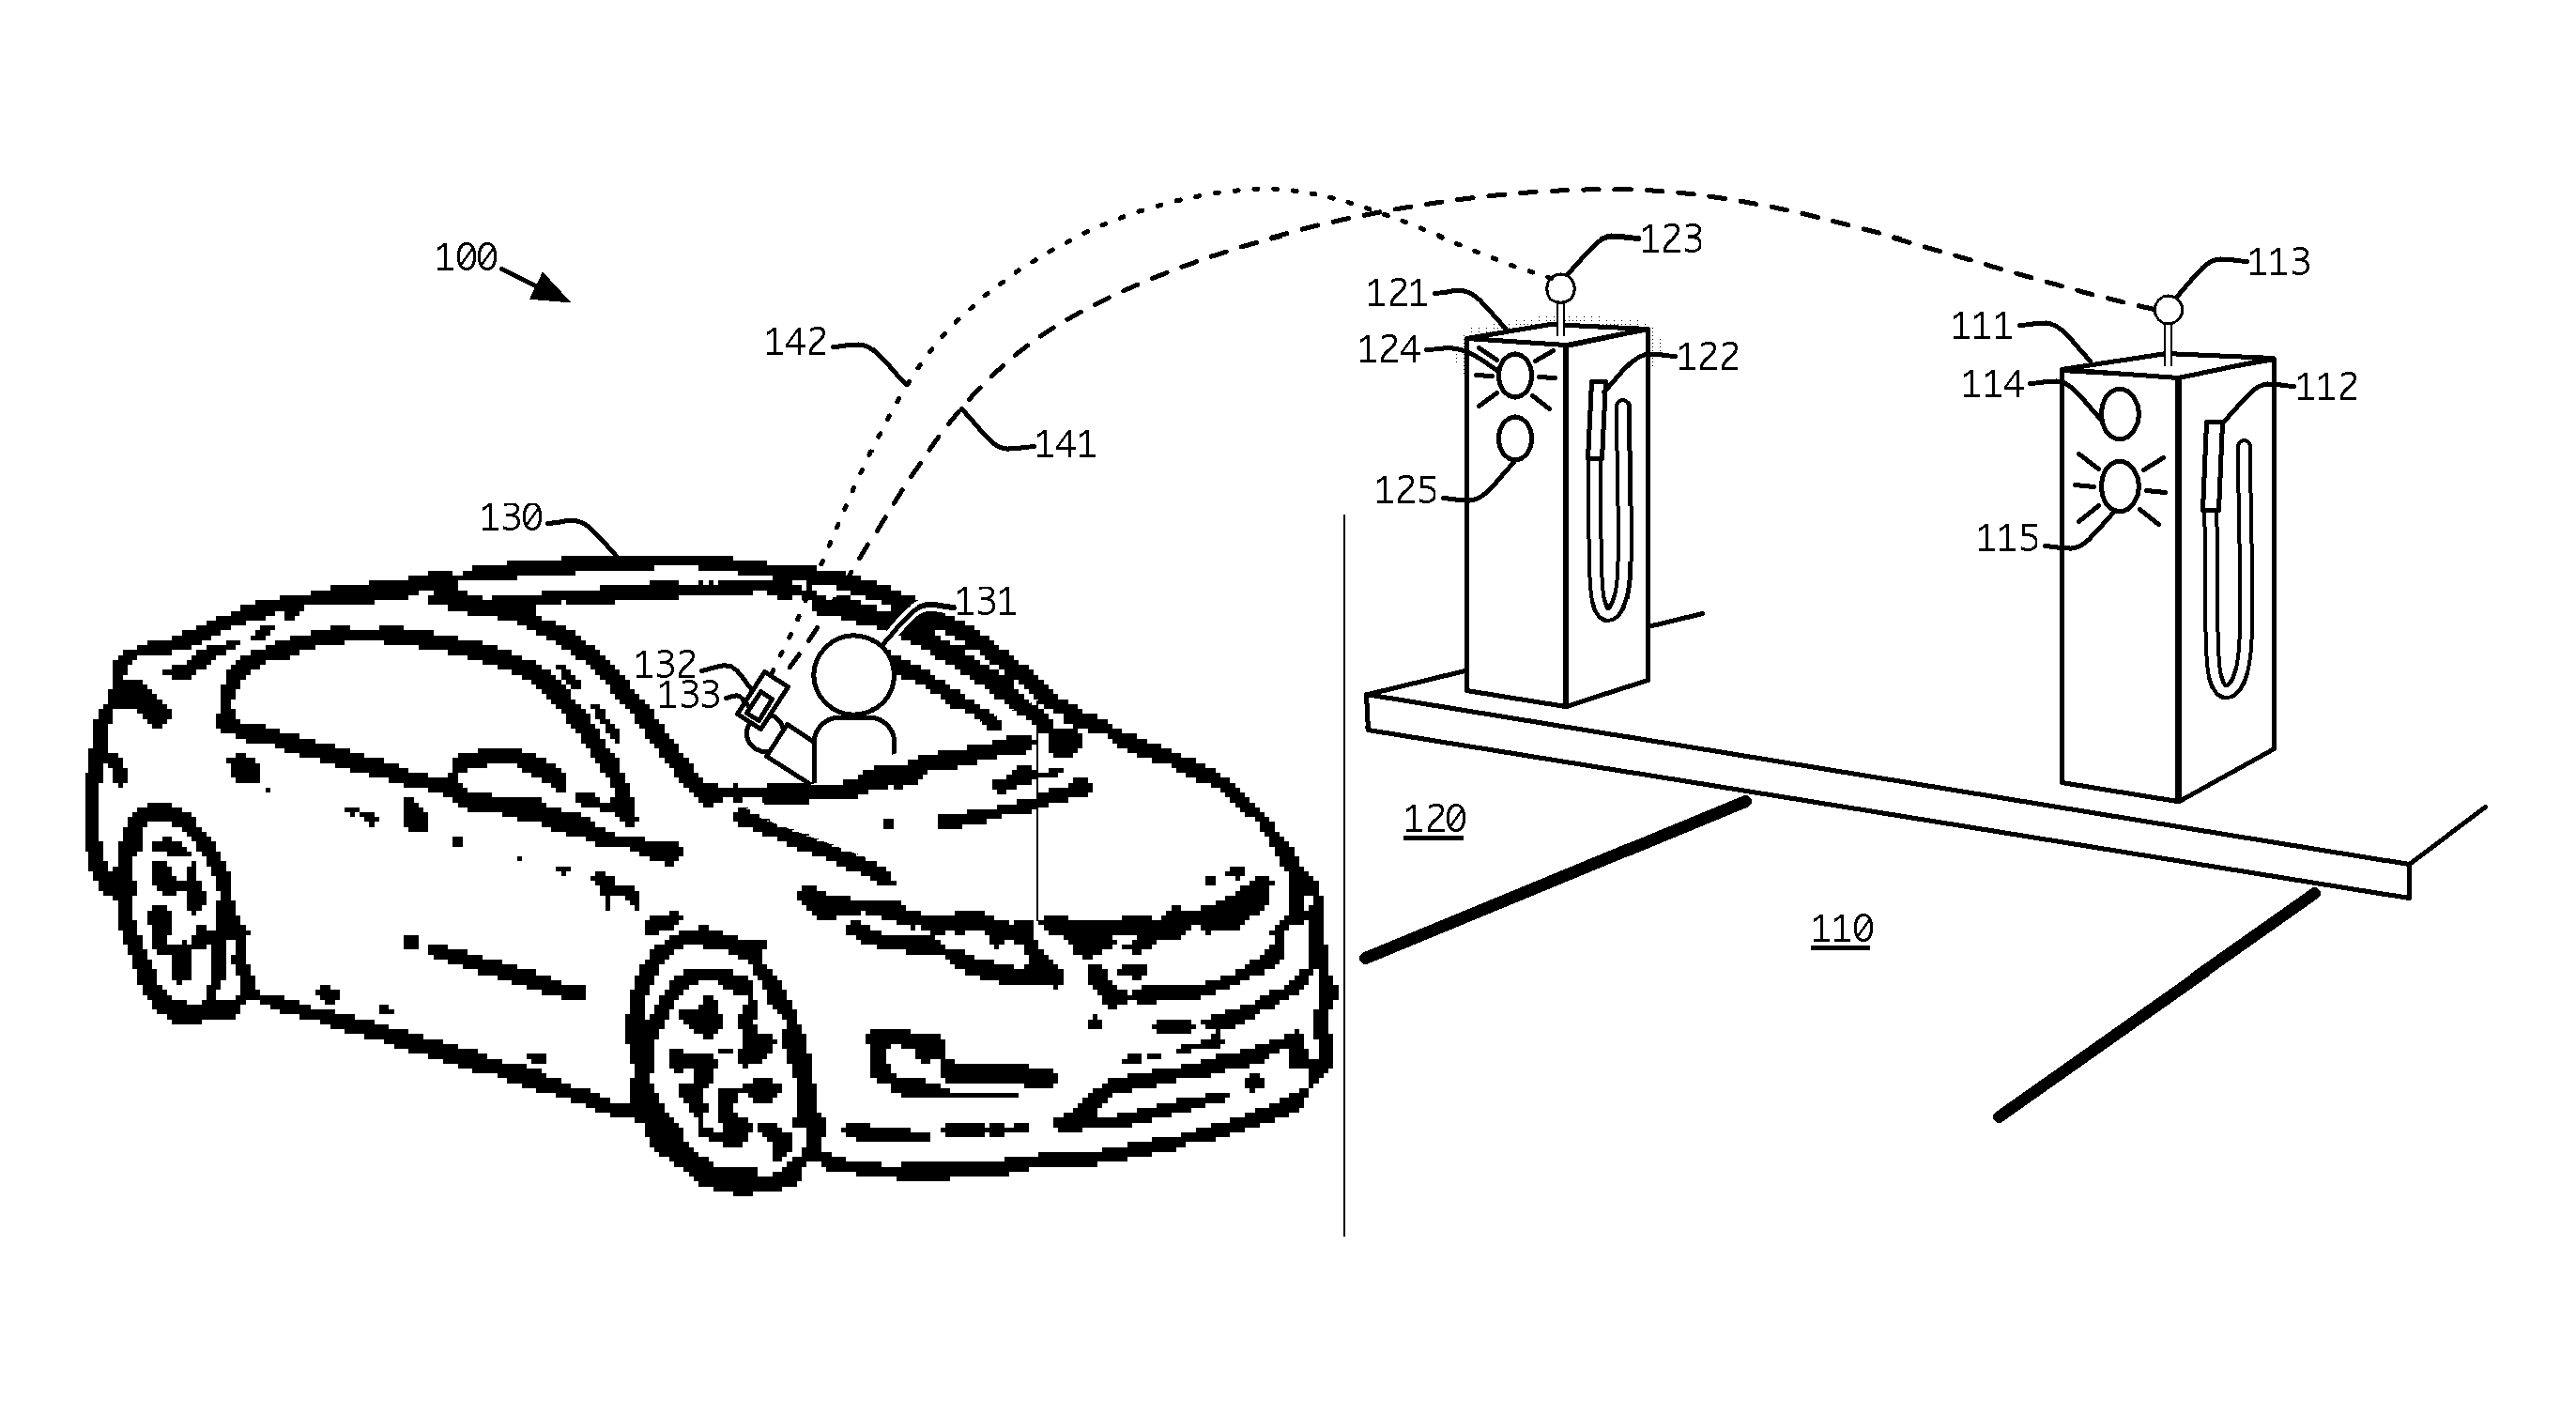 Method and apparatus for finding and accessing a vehicle fueling station and for reporting data from remote sensors